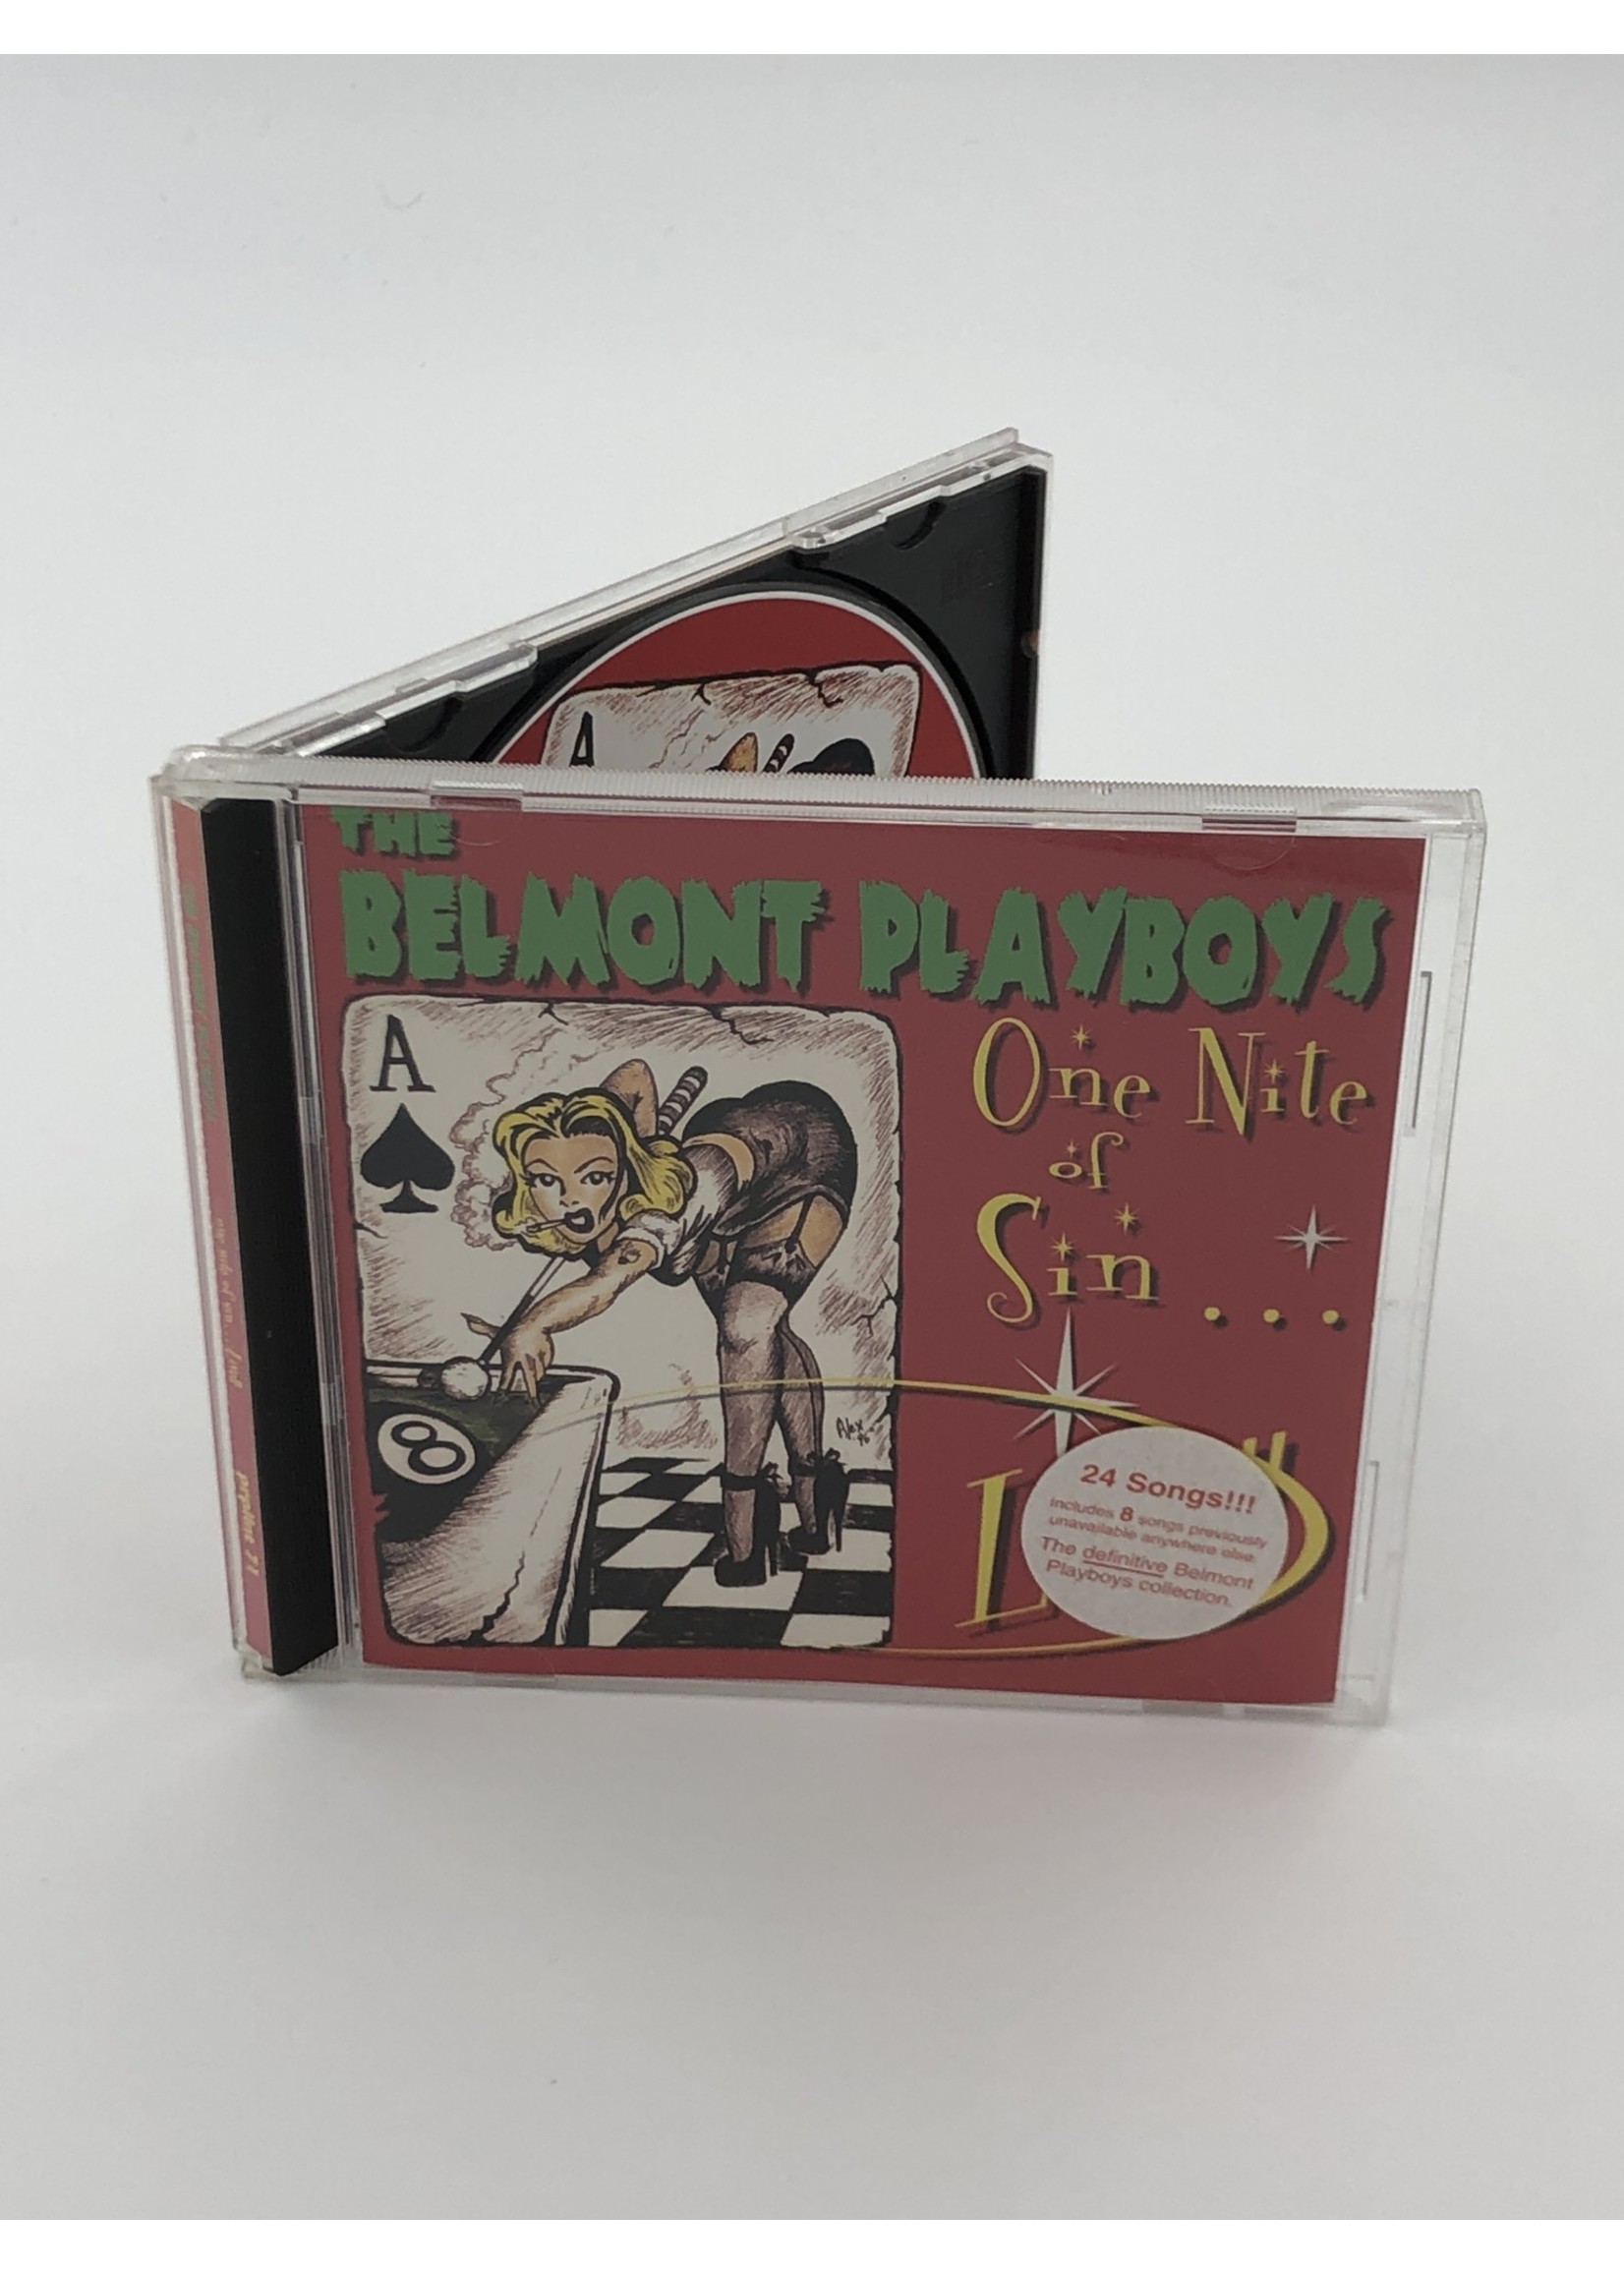 CD   The Belmont Playboys: One Nite of Sin....Live CD